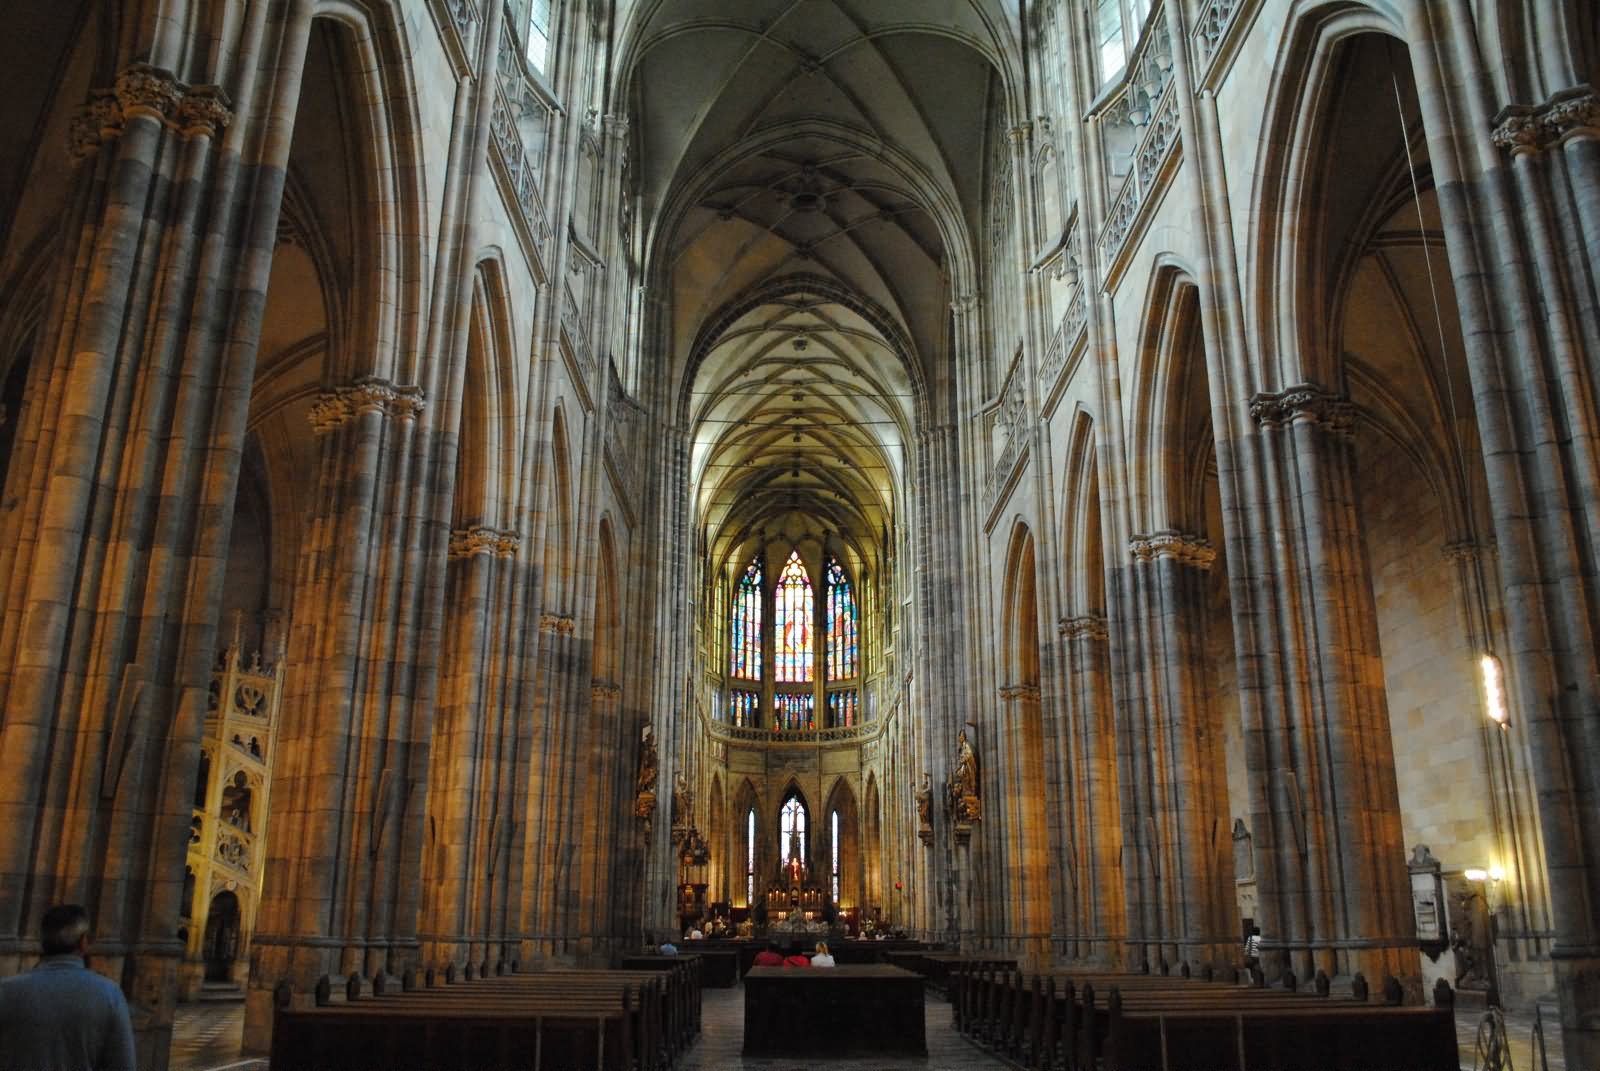 Inside View Of The St. Vitus Cathedral